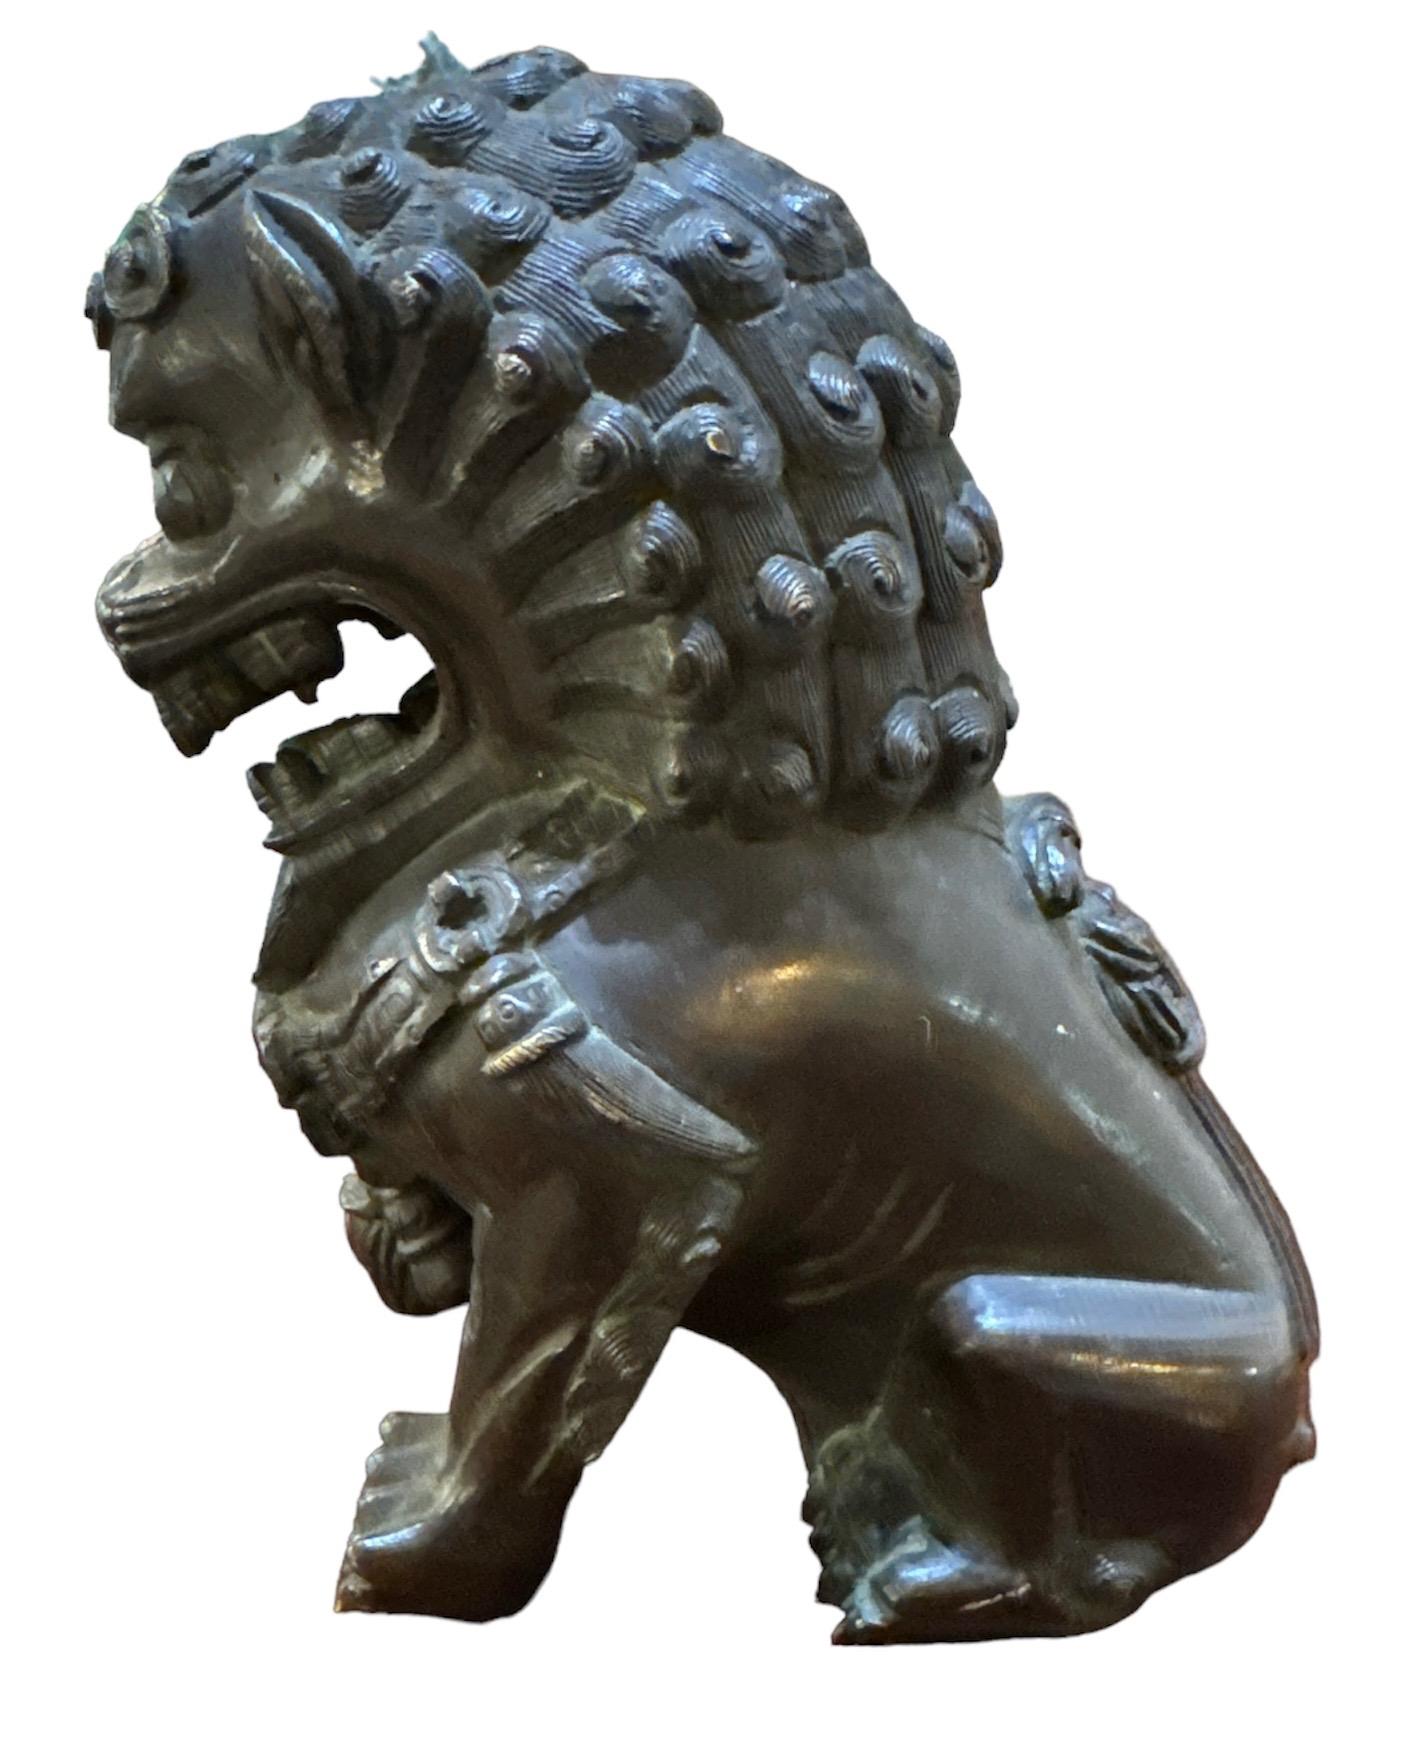 Antique Bronze Foo Dog. Wonderful age and patina from use. Measures 5.5h x 5.5w x 3.5w
